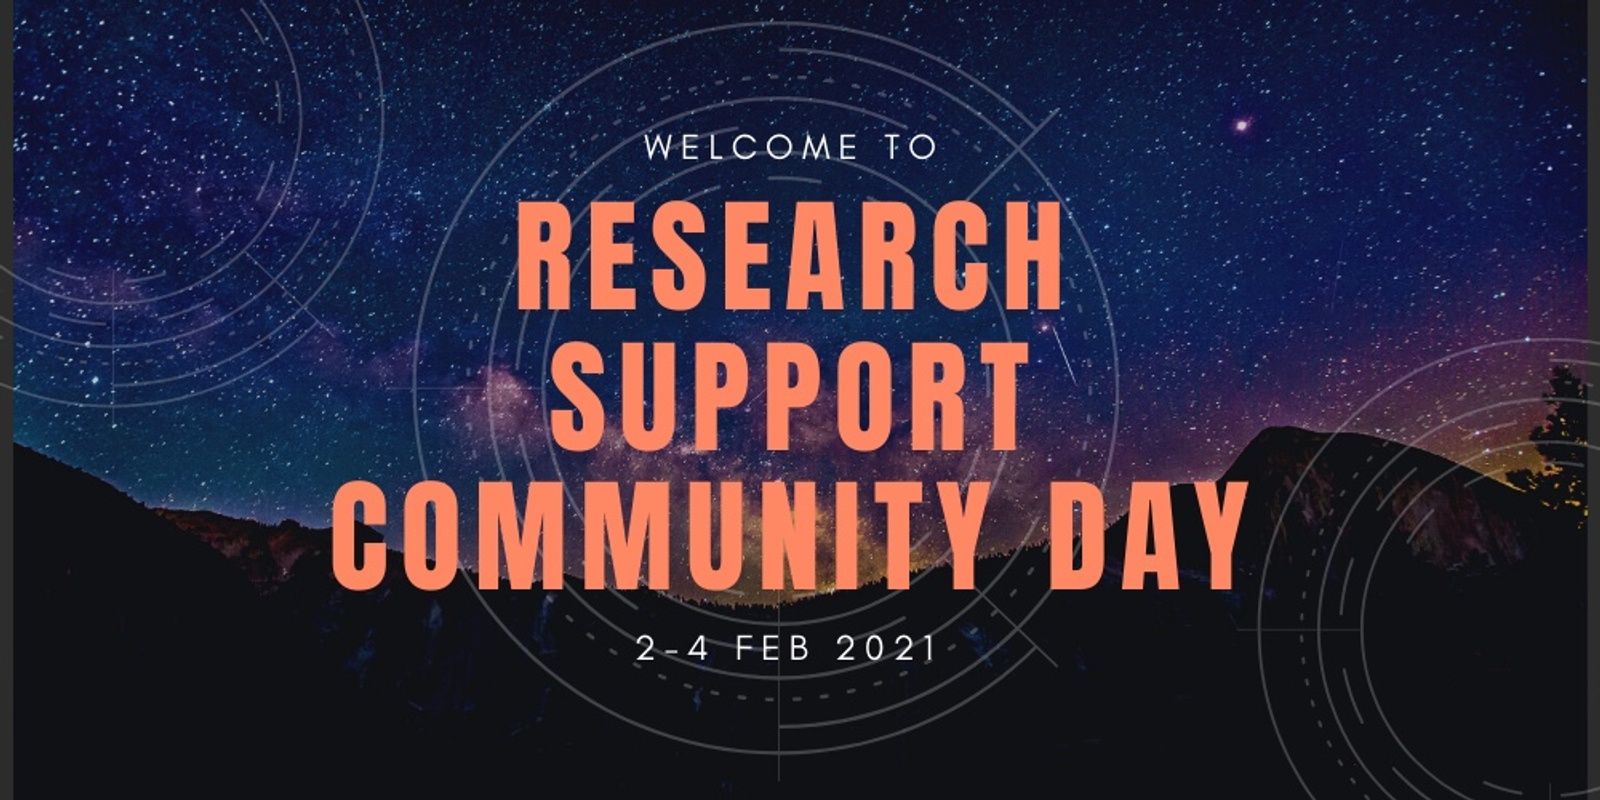 Research Support Community Day 2021 Humanitix